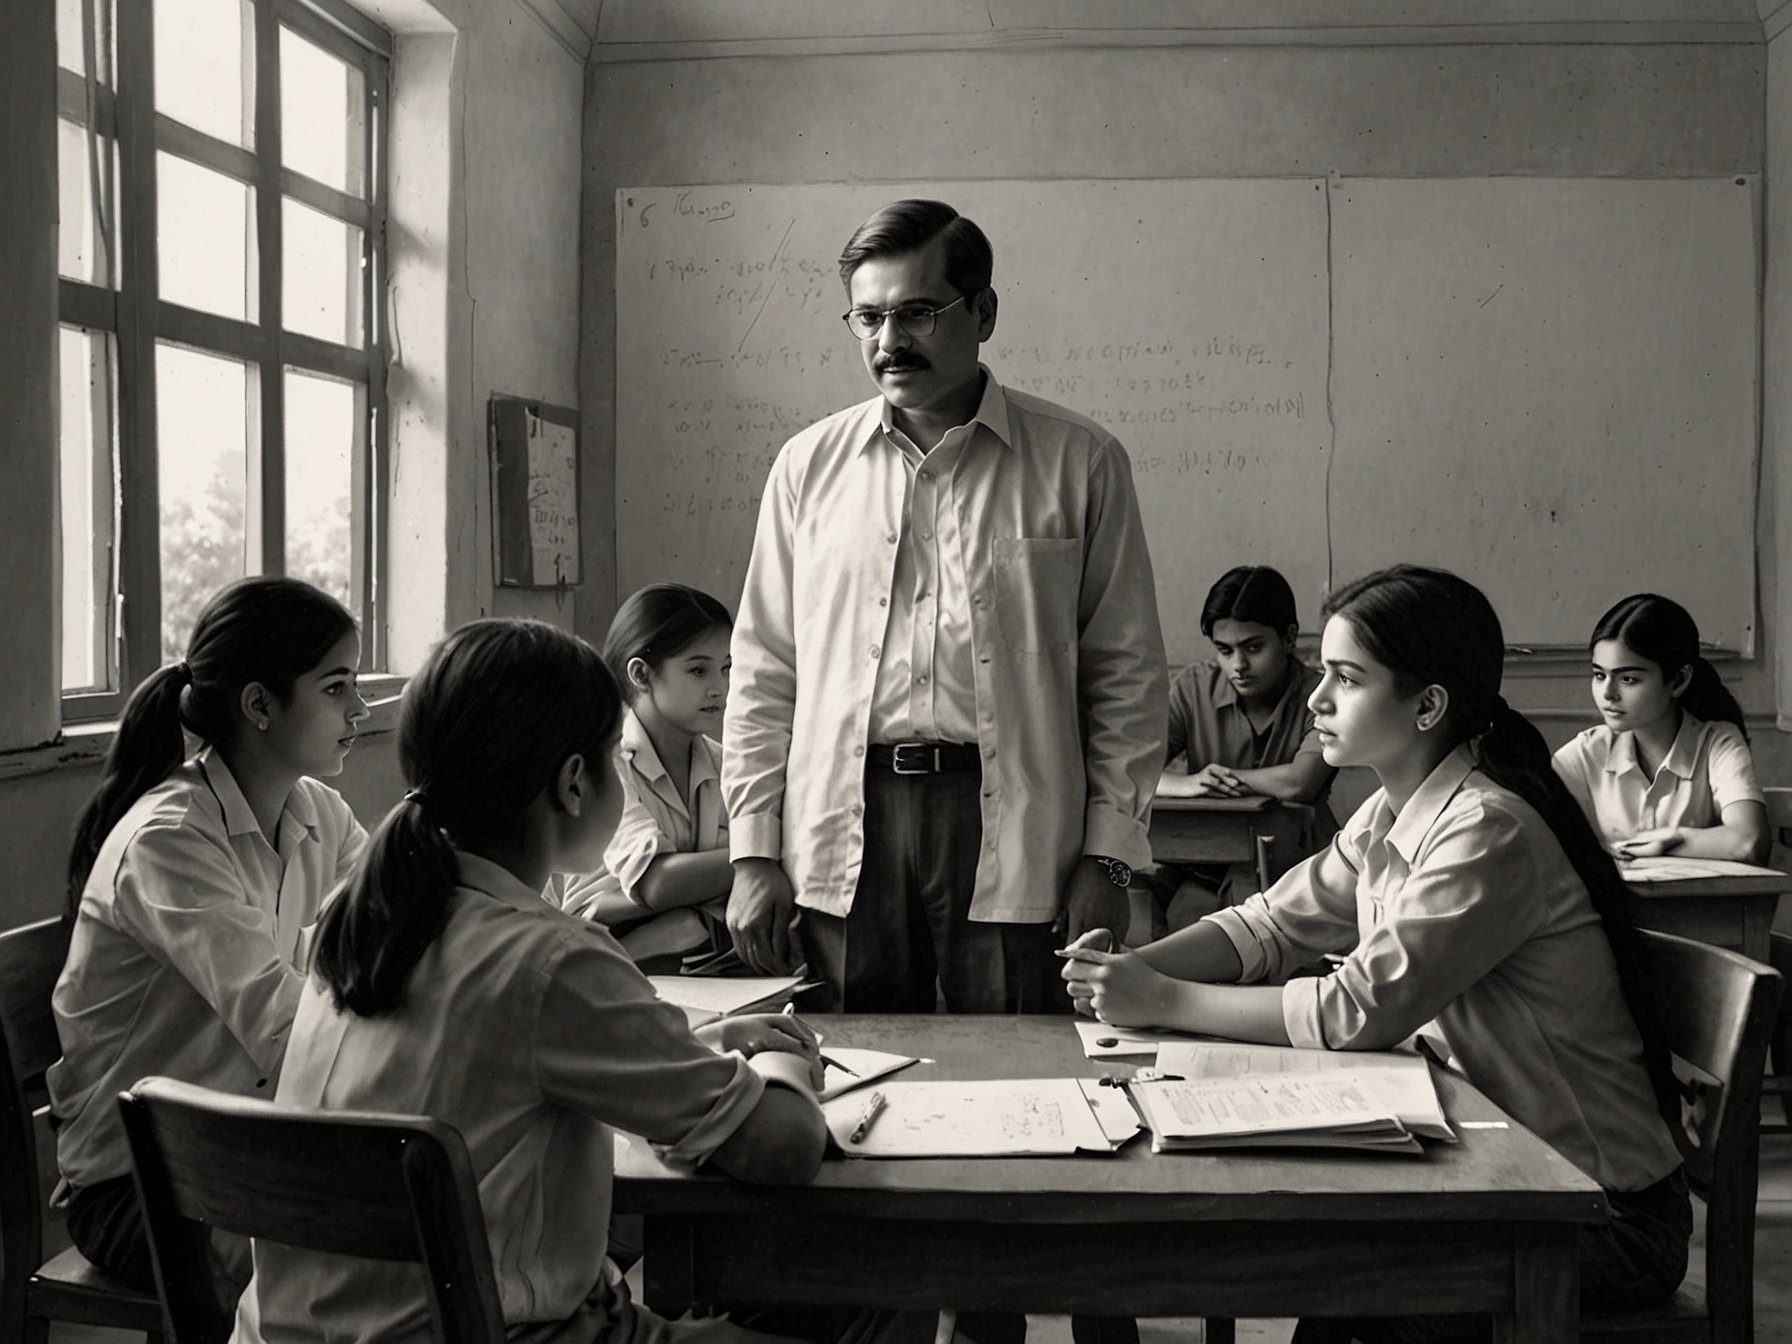 Jitendra Kumar as Jeetu Bhaiya, a mentor, surrounded by students in a classroom setting, depicting the intense academic atmosphere of Kota.